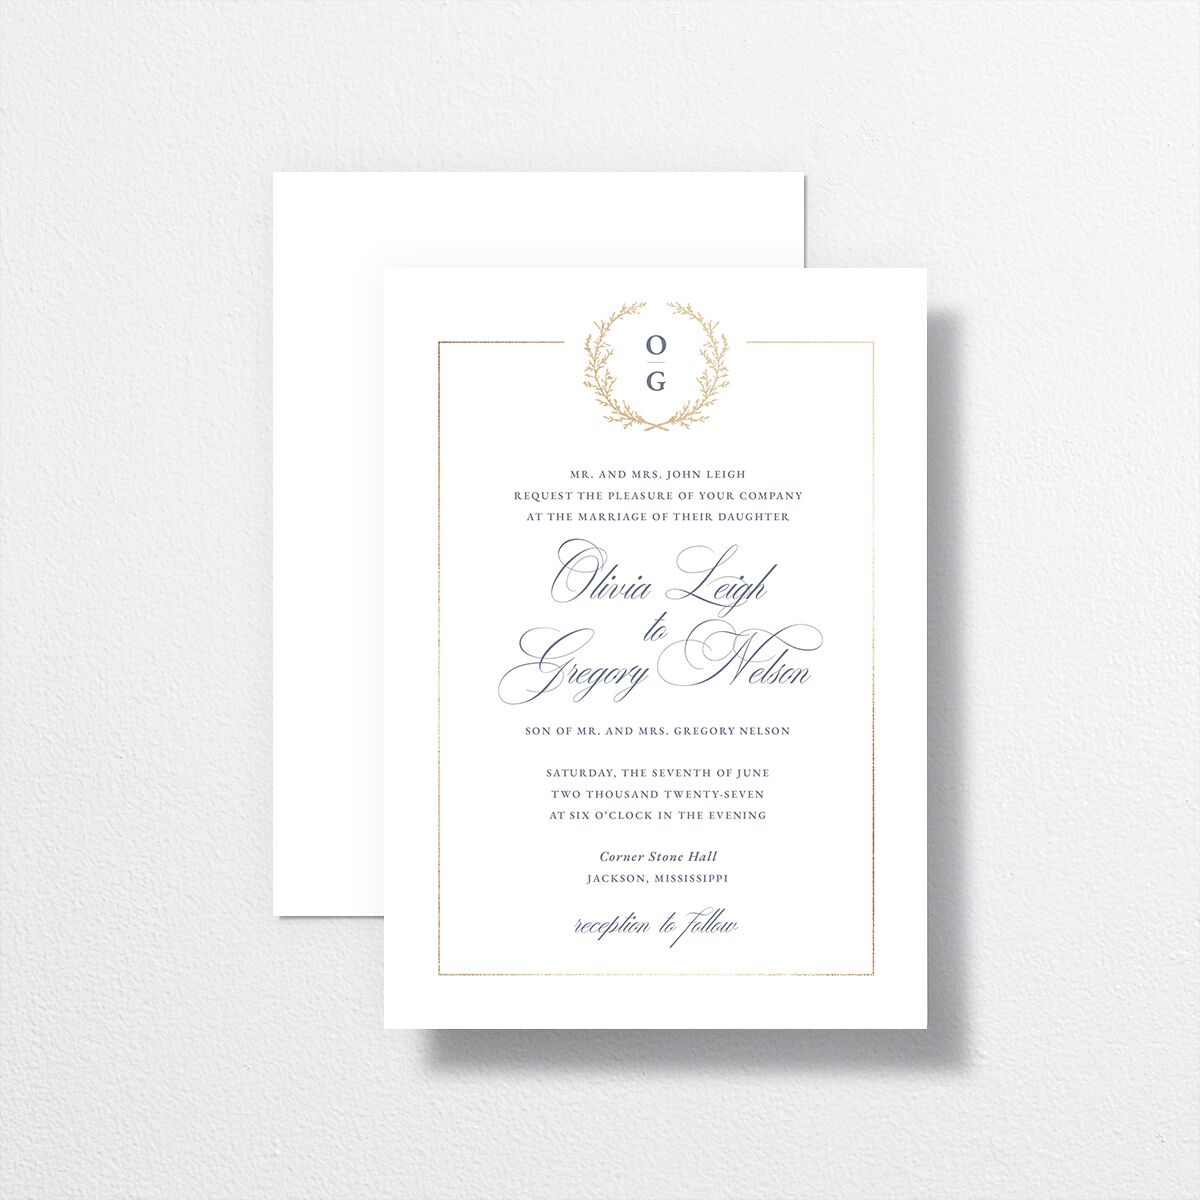 Gilded Wreath Wedding Invitations front-and-back